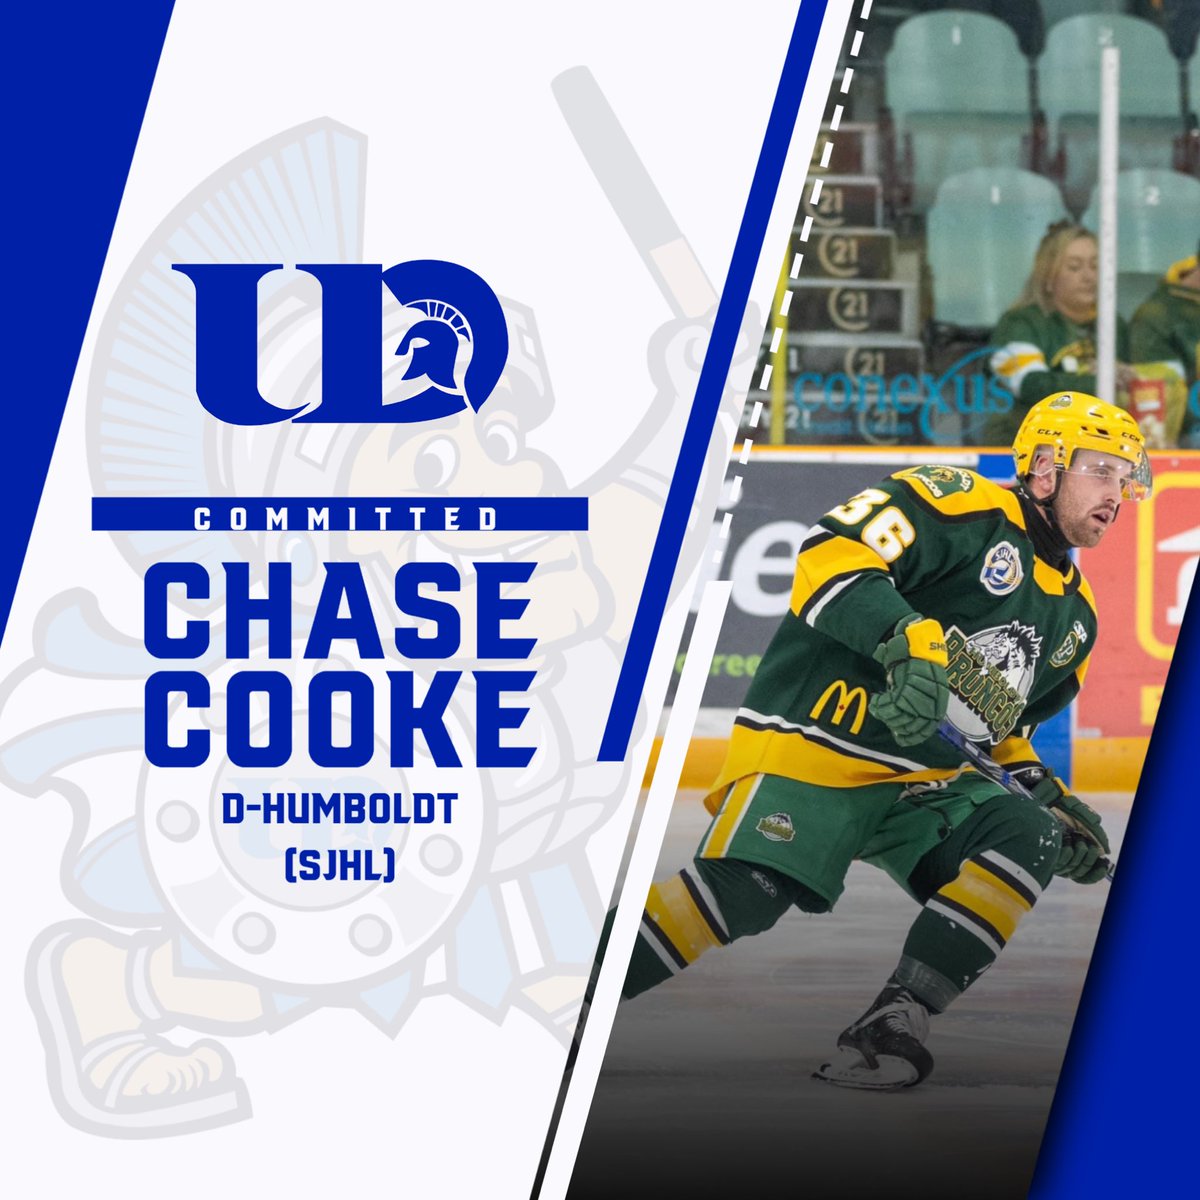 Welcome to the University of Dubuque, Chase! #UDHockey